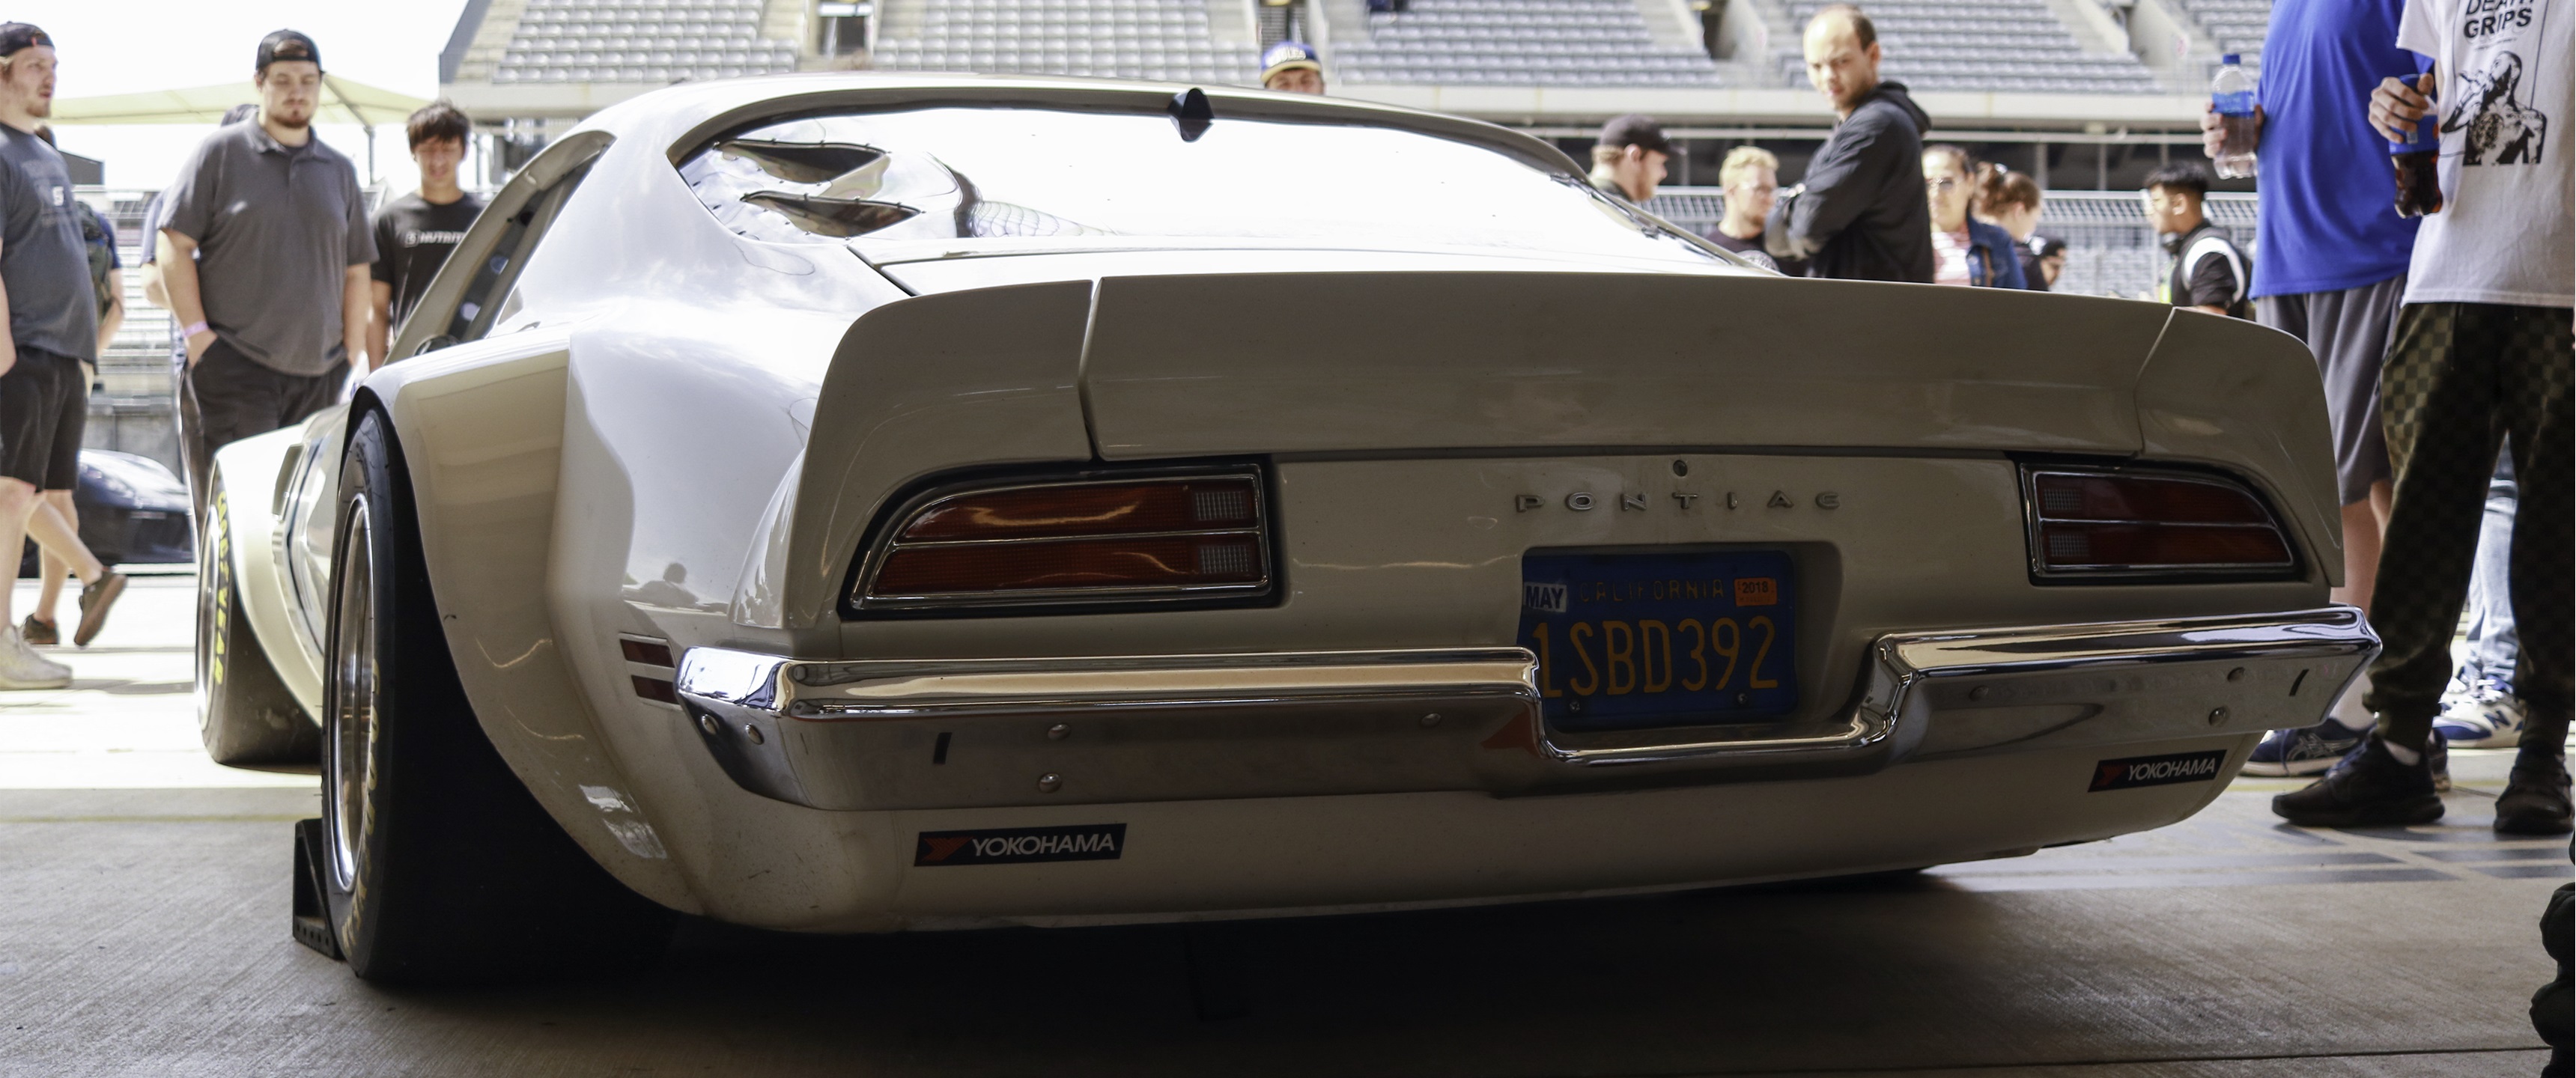 General 3440x1440 Trans Am Pontiac car rear view licence plates classic car muscle cars stanced American cars